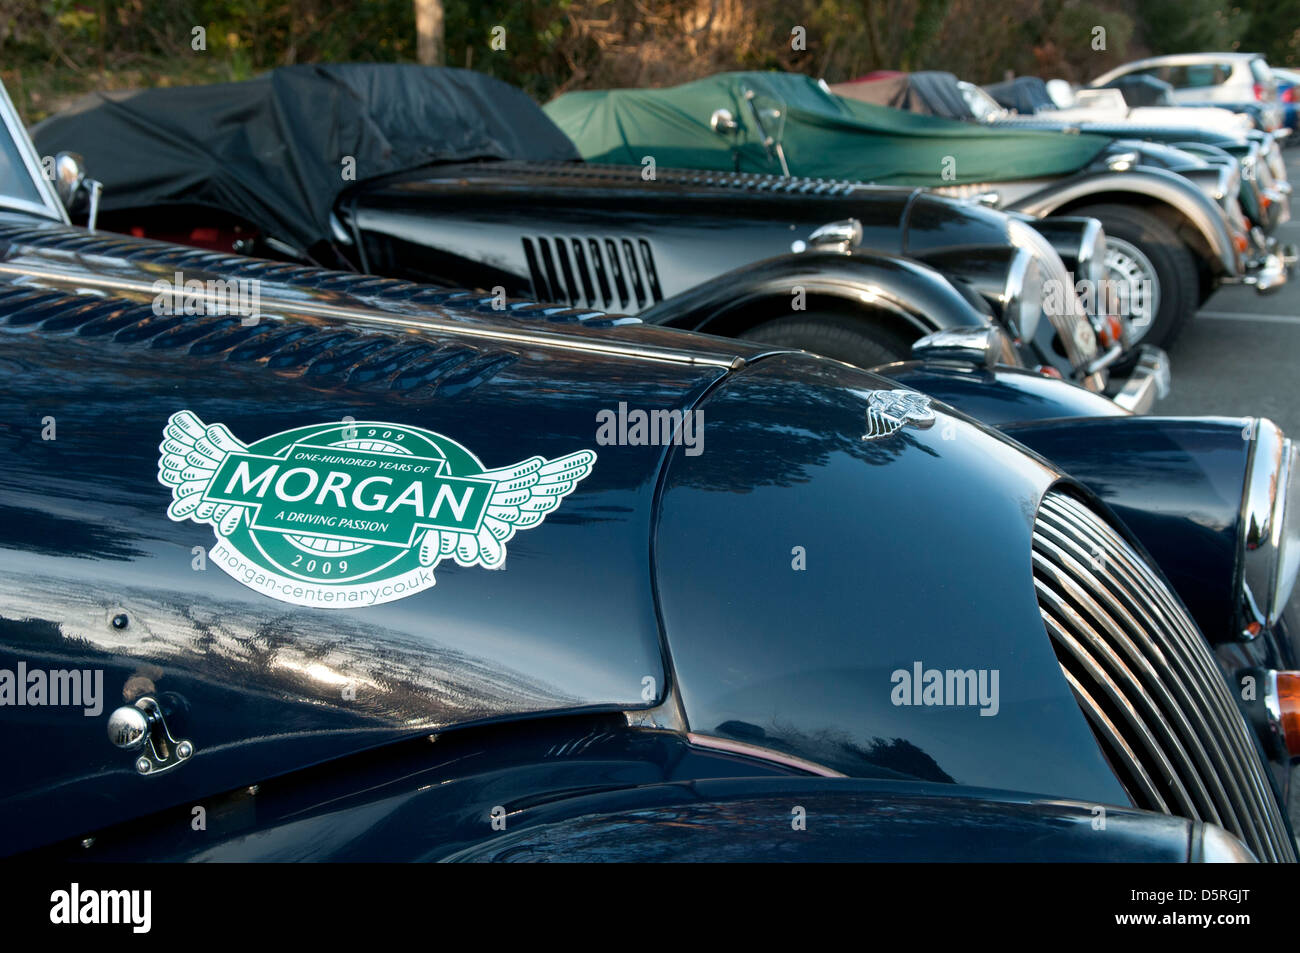 A meeting of Morgans Stock Photo